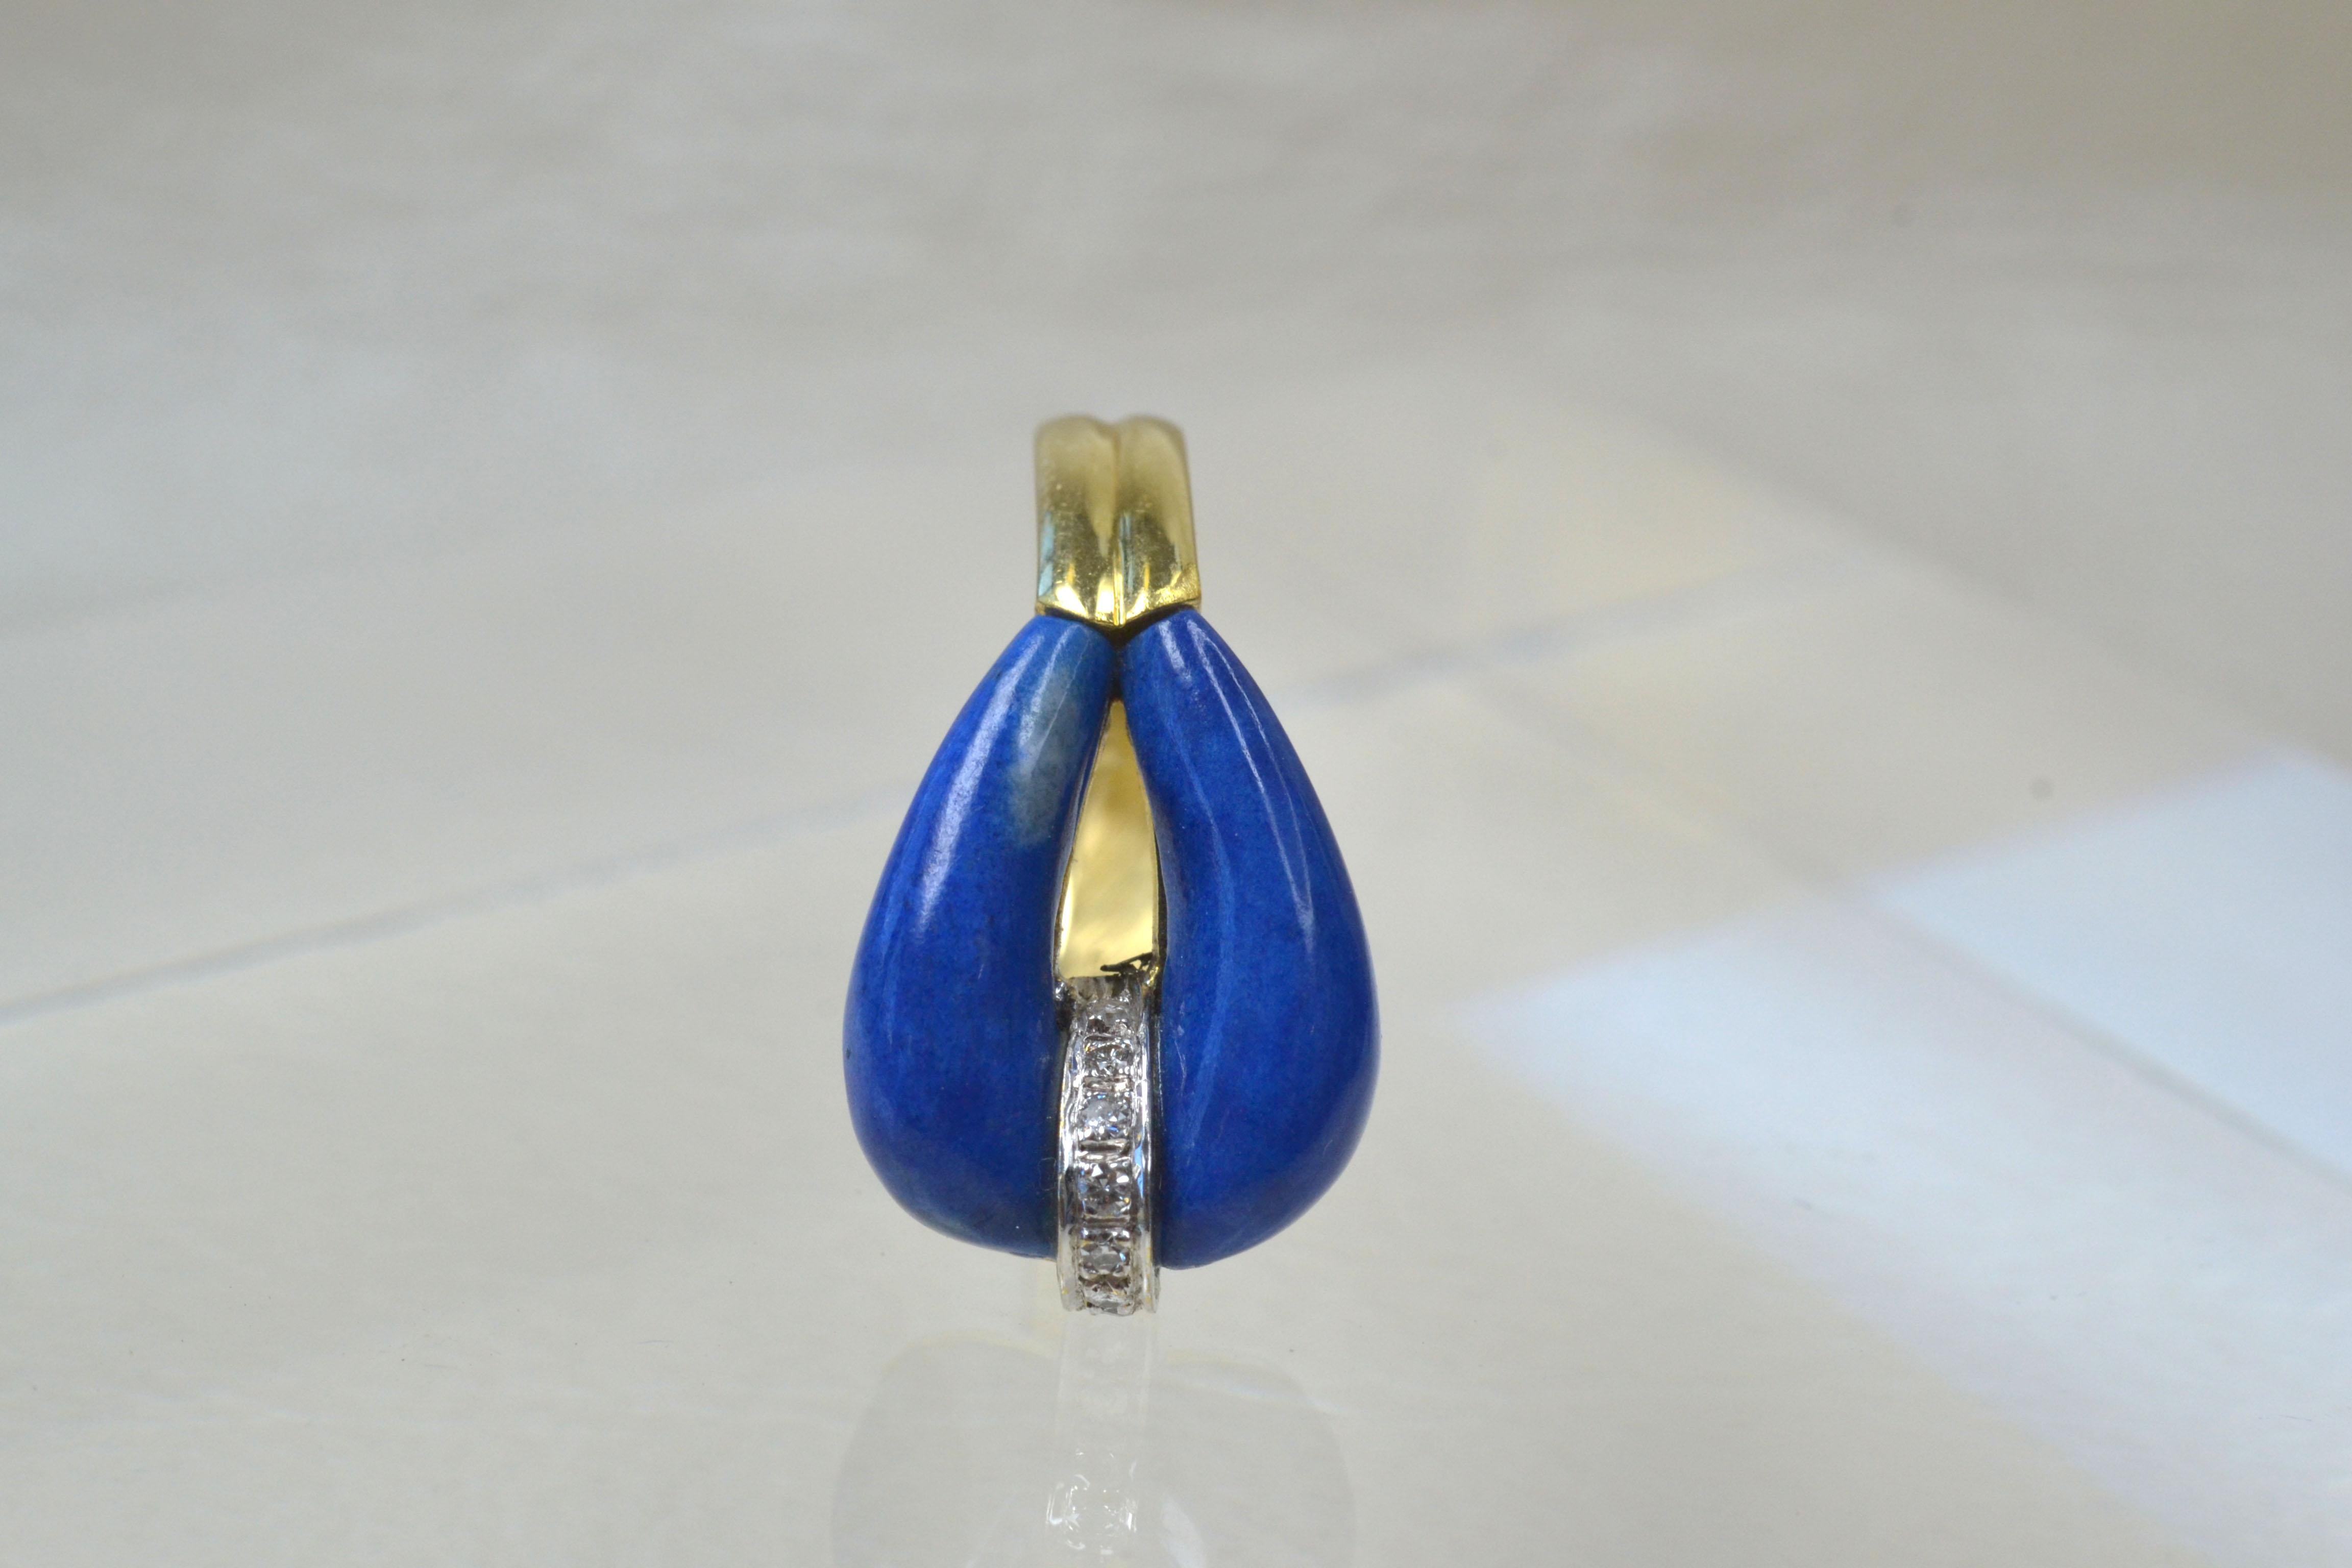 Vintage 14k Gold Lapis Lazuli Teardrop Ring with Diamonds, One-of-a-kind In Good Condition For Sale In London, GB